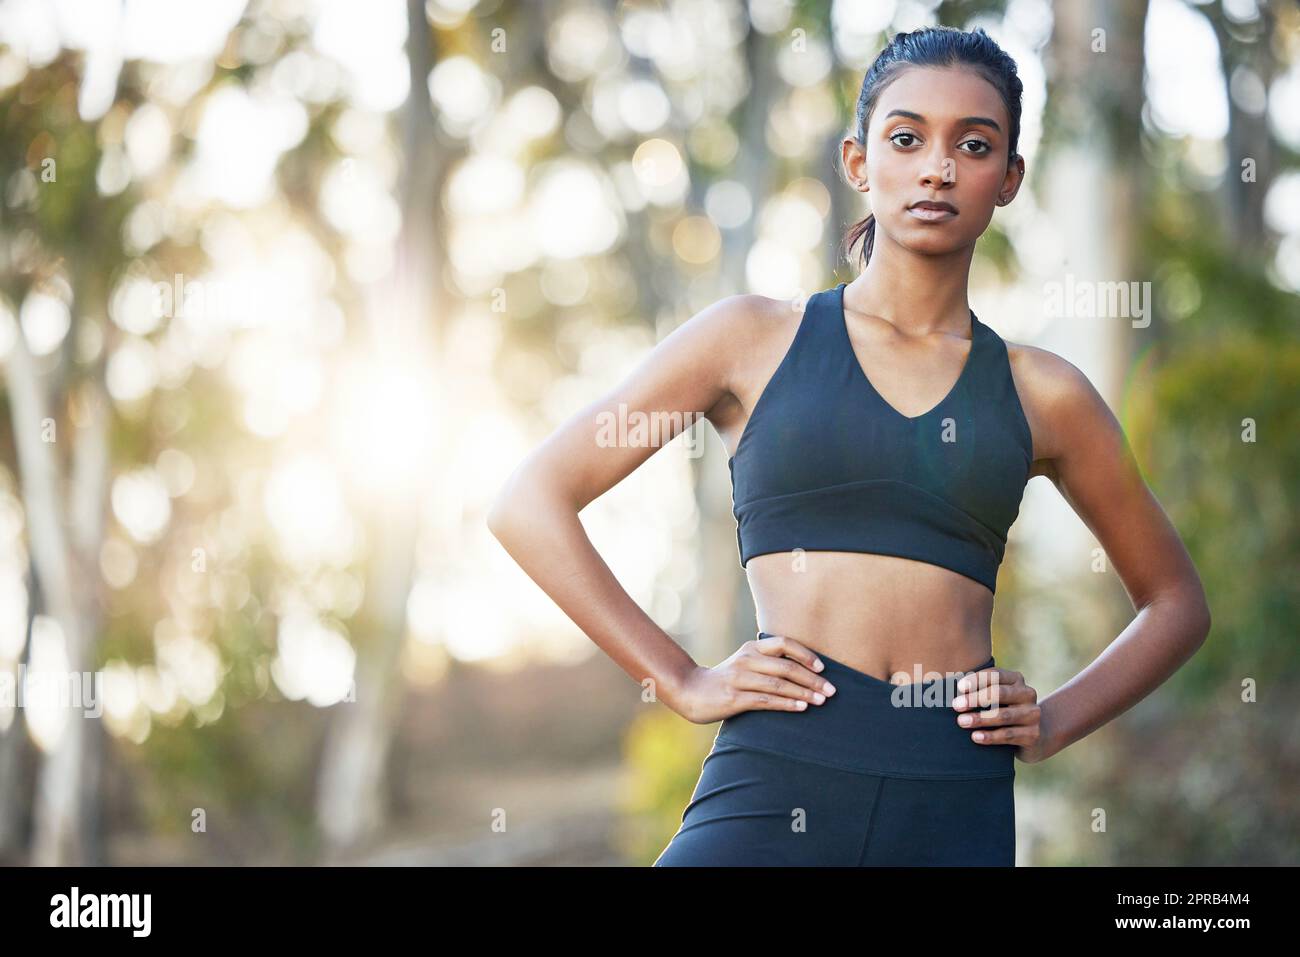 Dont limit your challenges - challenge your limits. Portrait of a sporty young woman exercising outdoors. Stock Photo